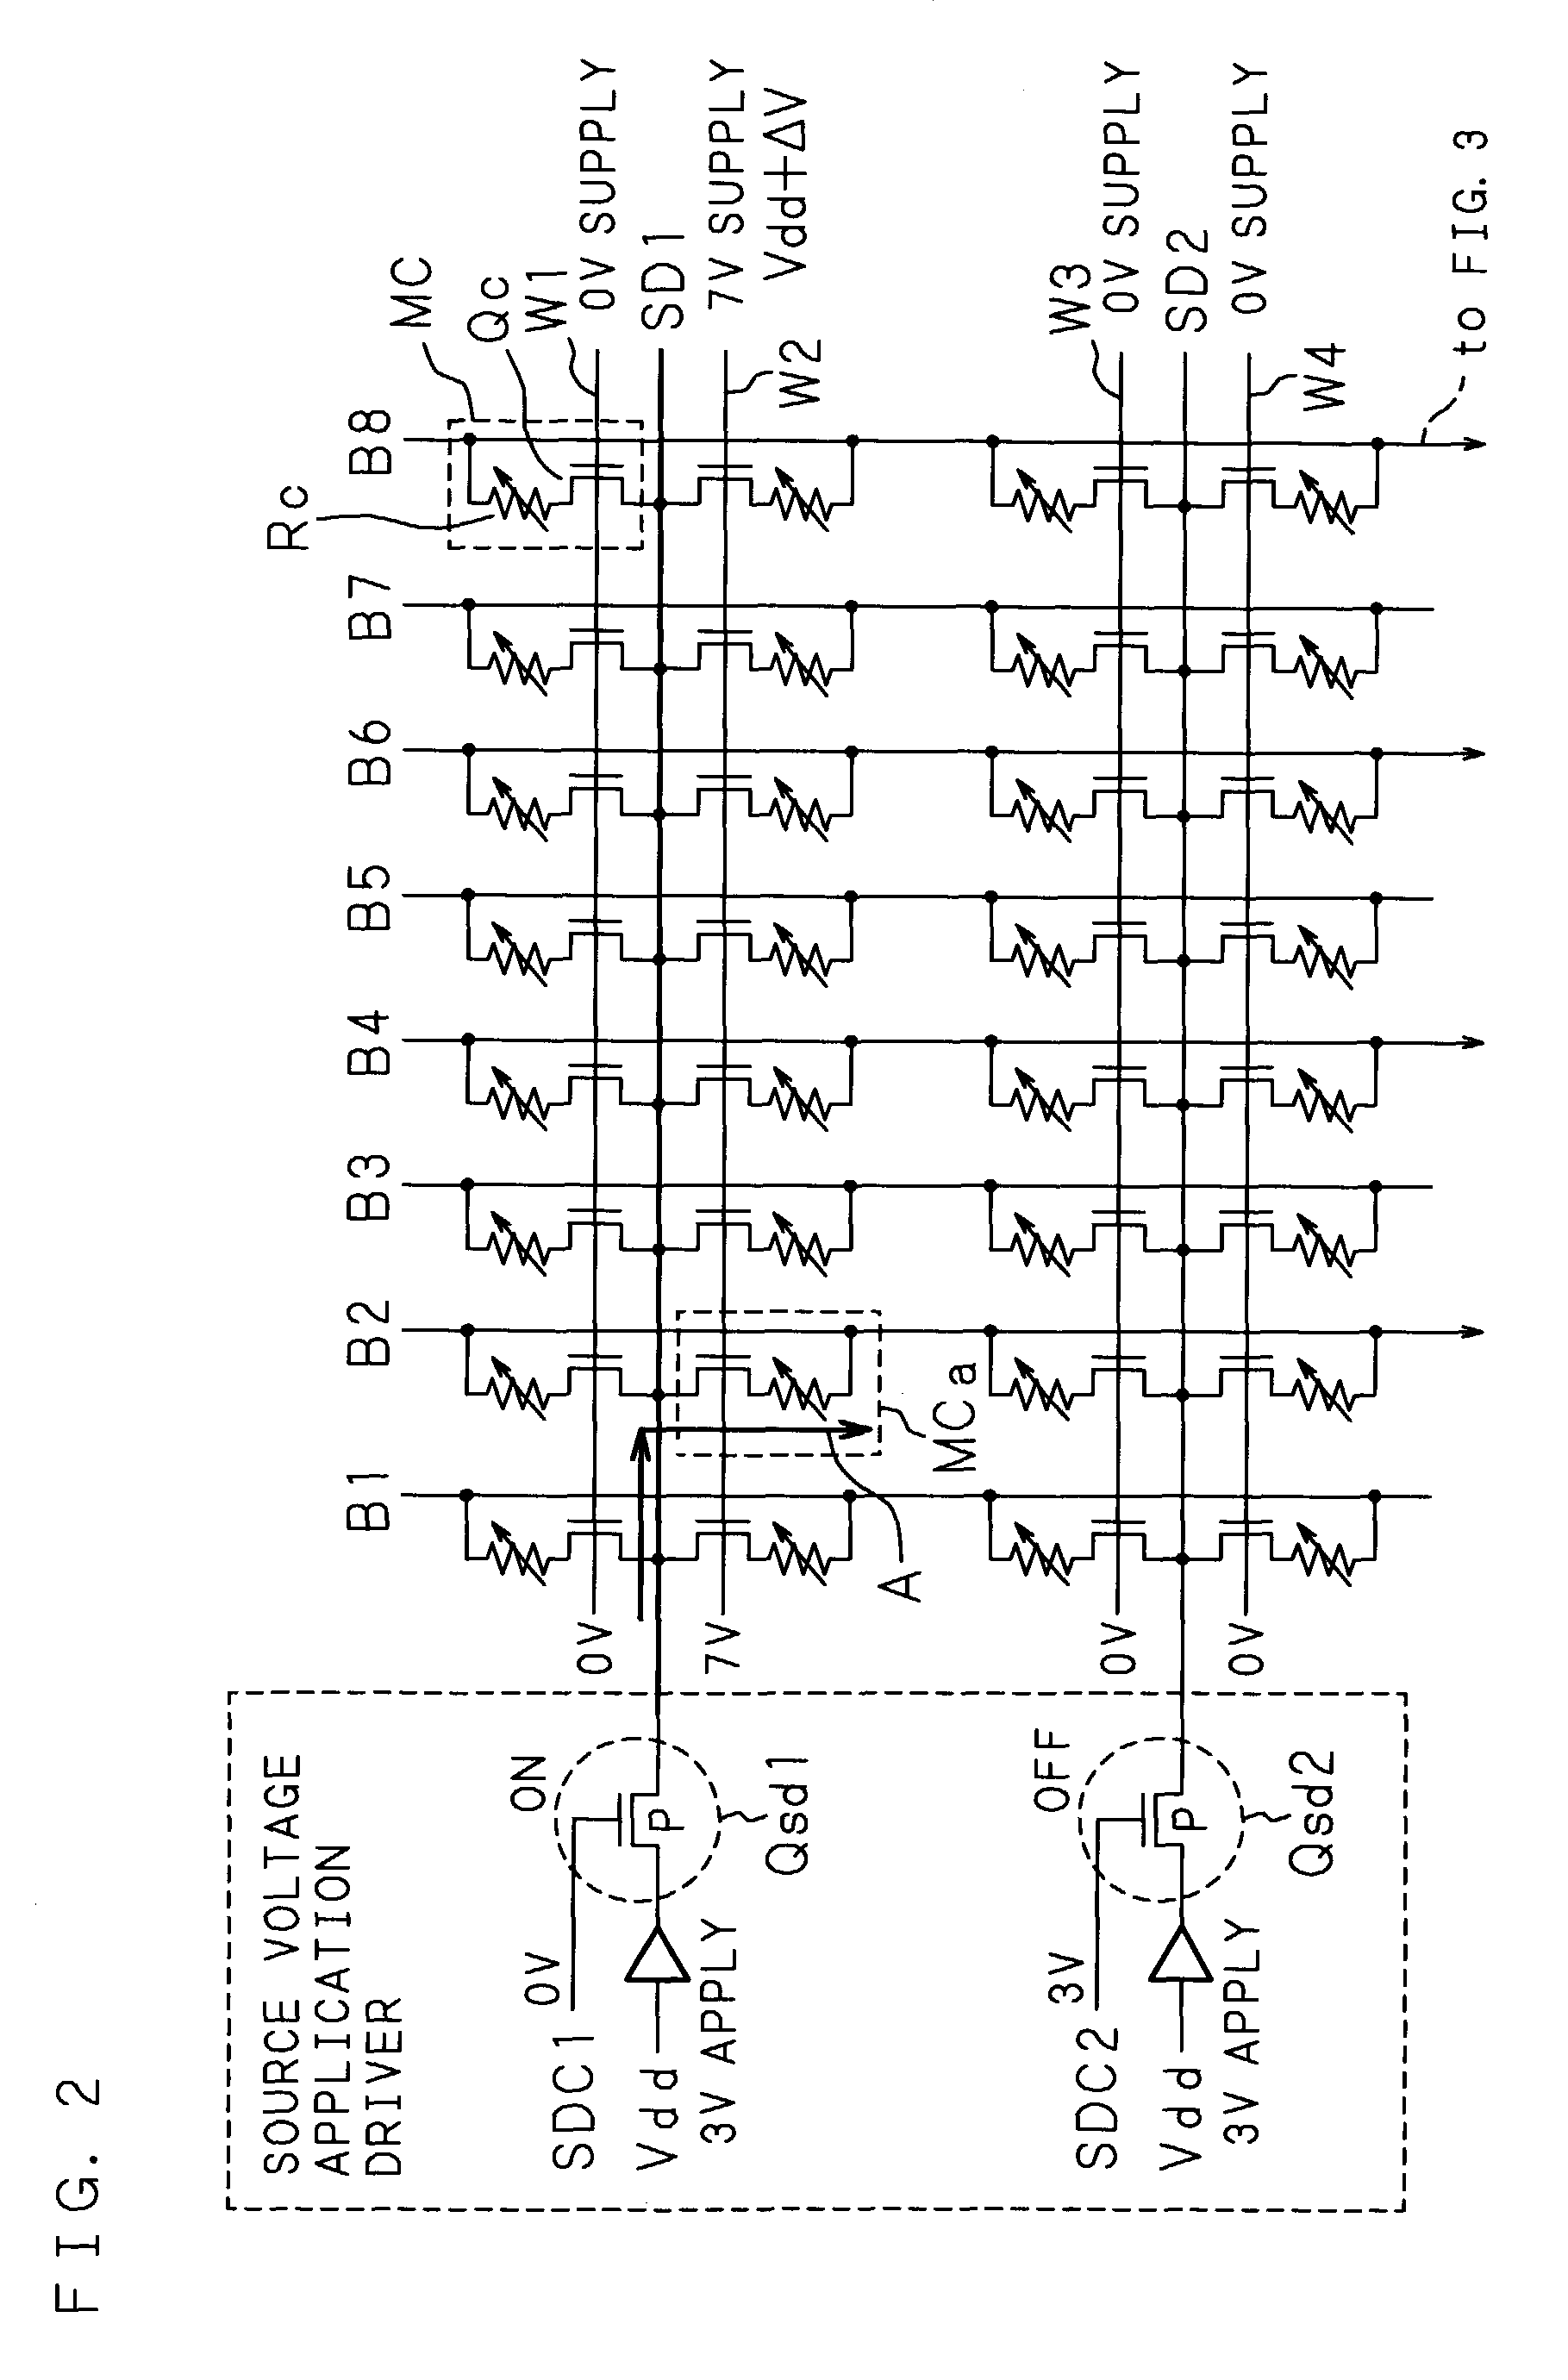 Memory cell with a perovskite structure varistor